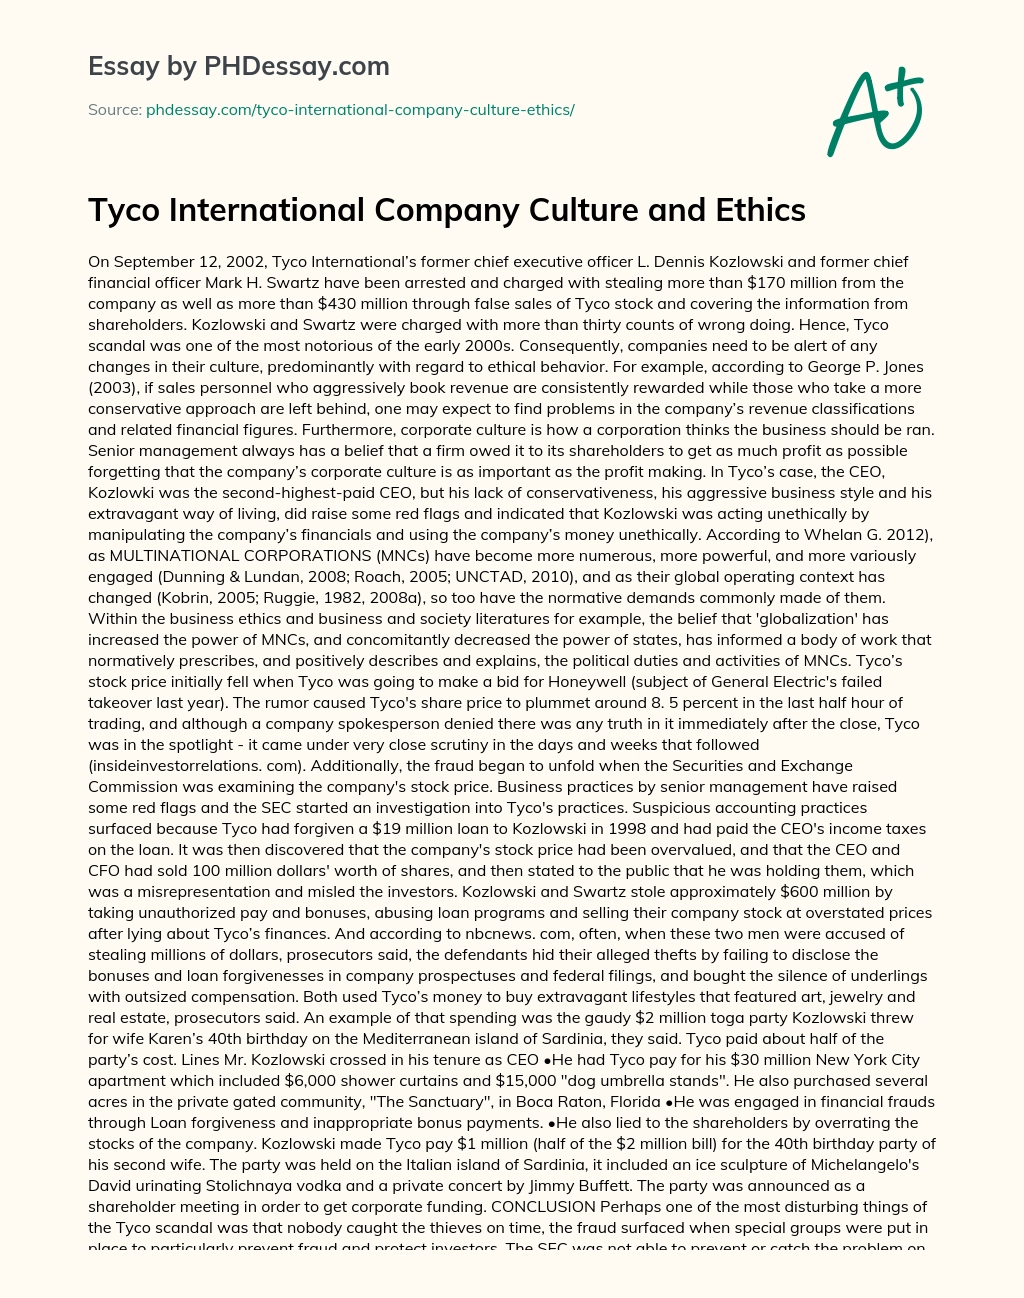 Tyco International Company Culture and Ethics essay